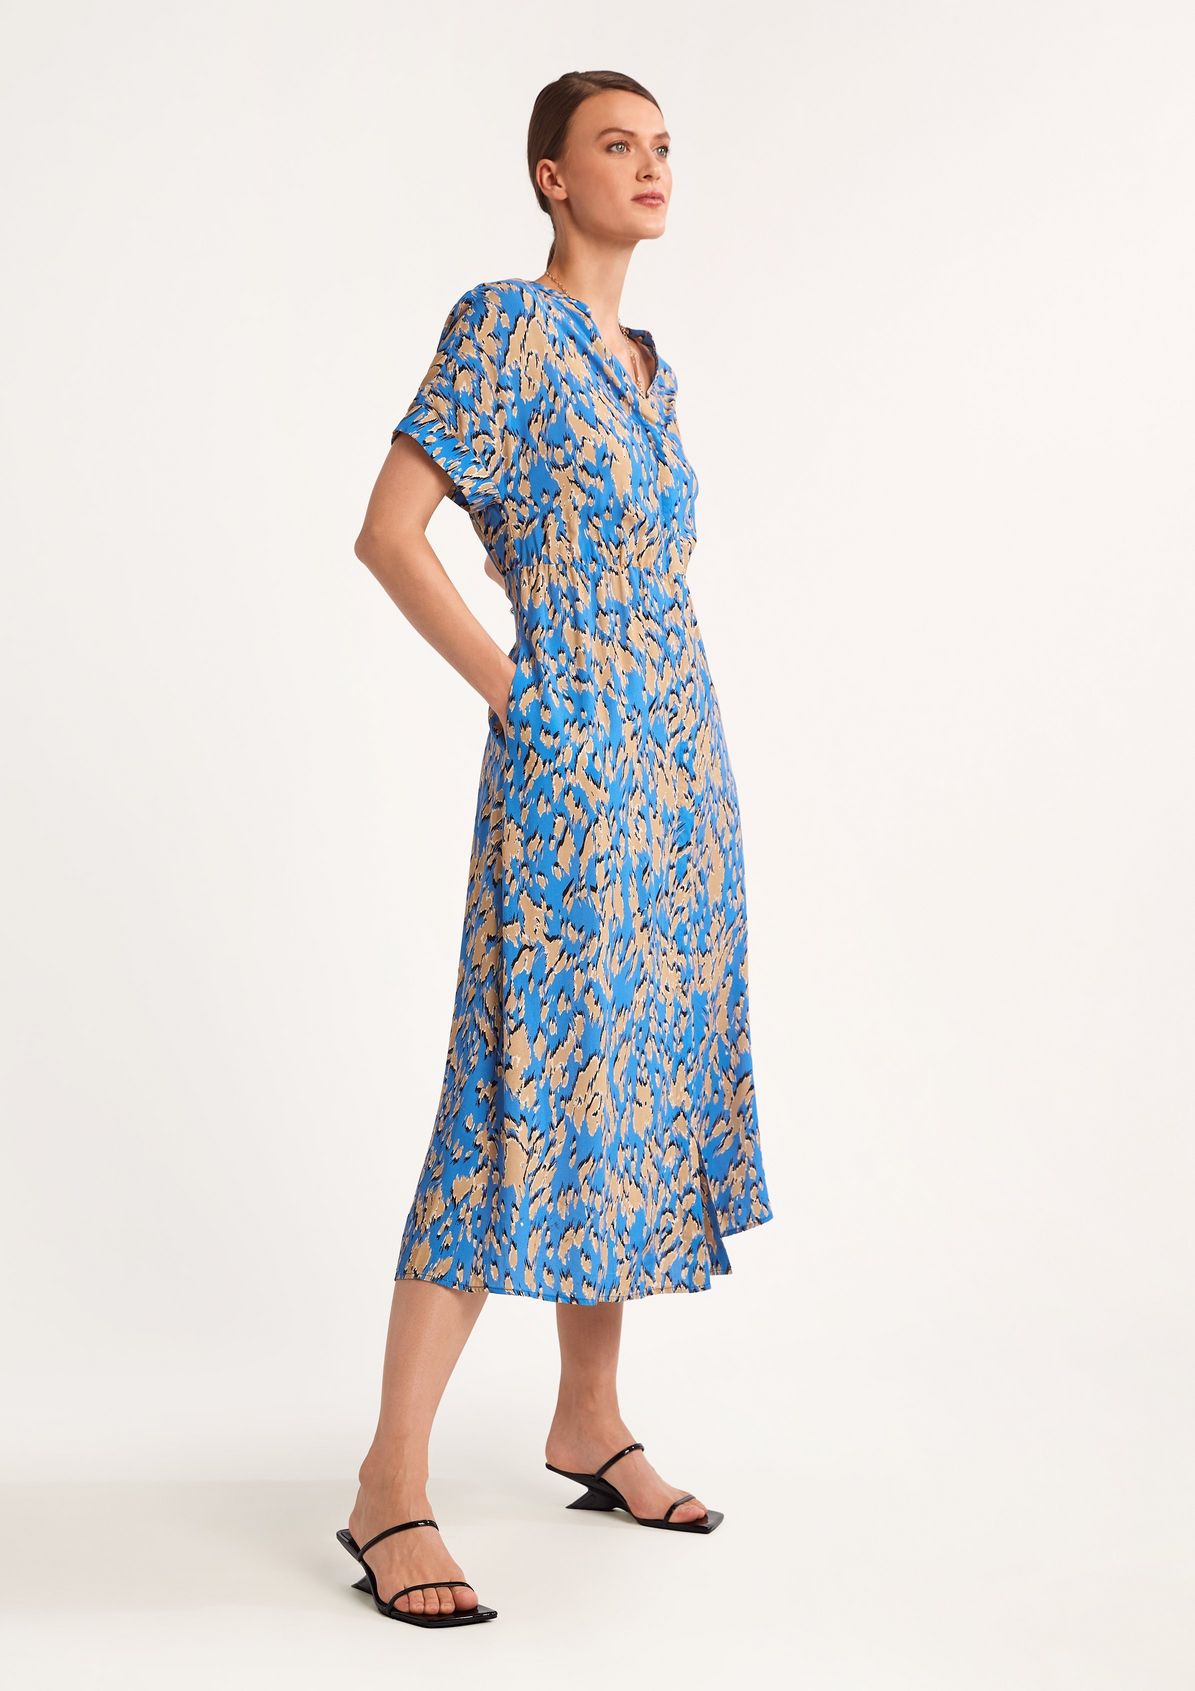 Viscose dress with all-over pattern from comma